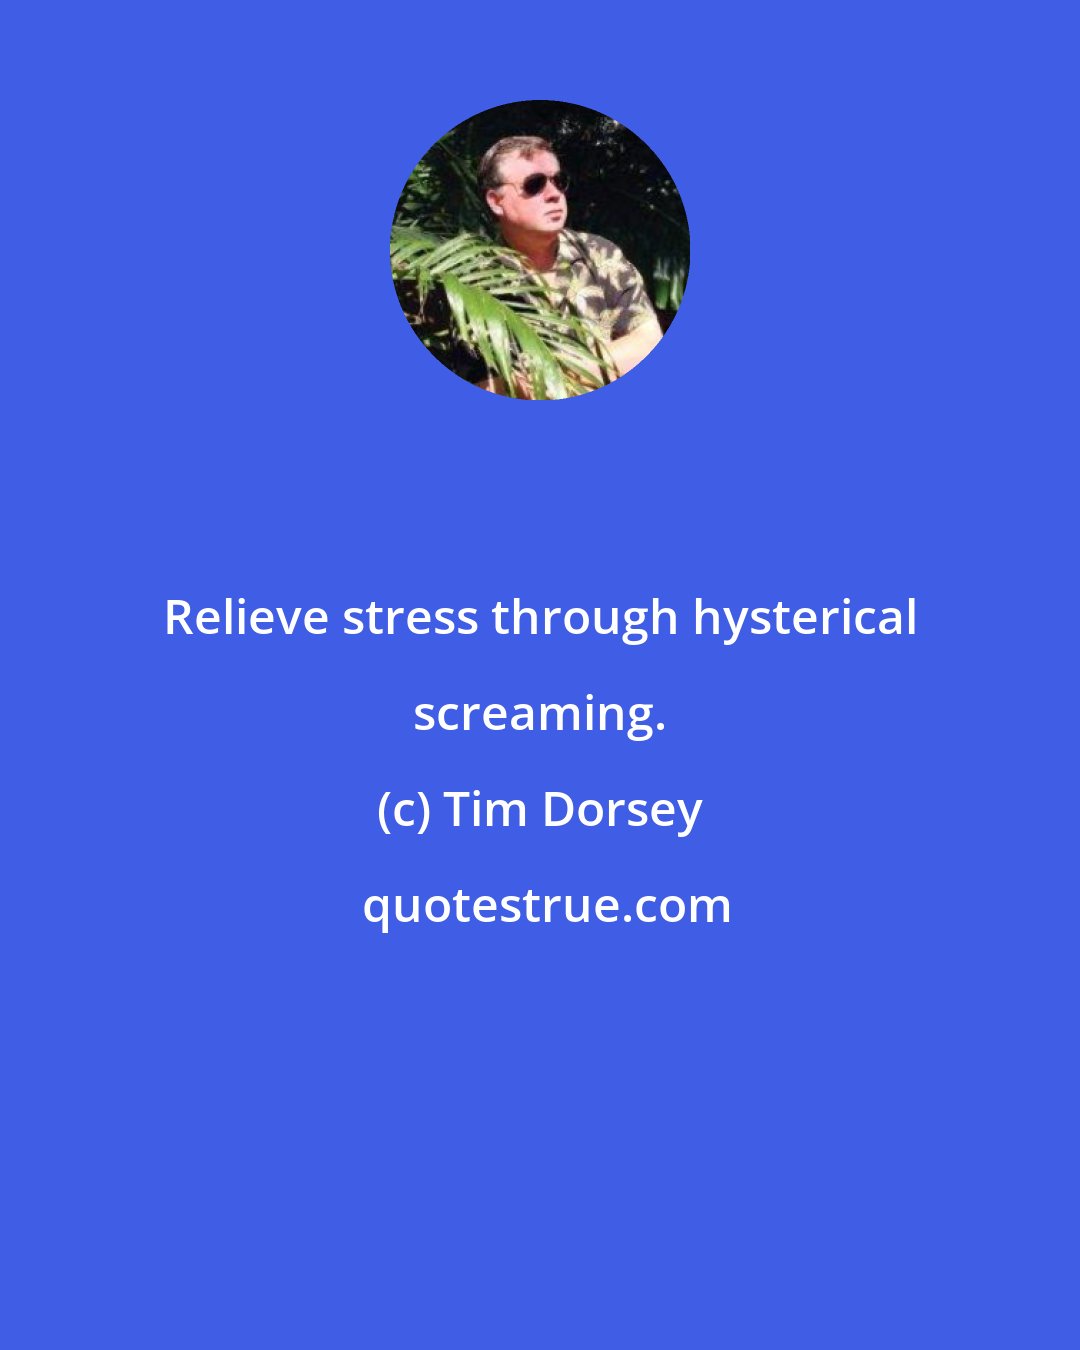 Tim Dorsey: Relieve stress through hysterical screaming.